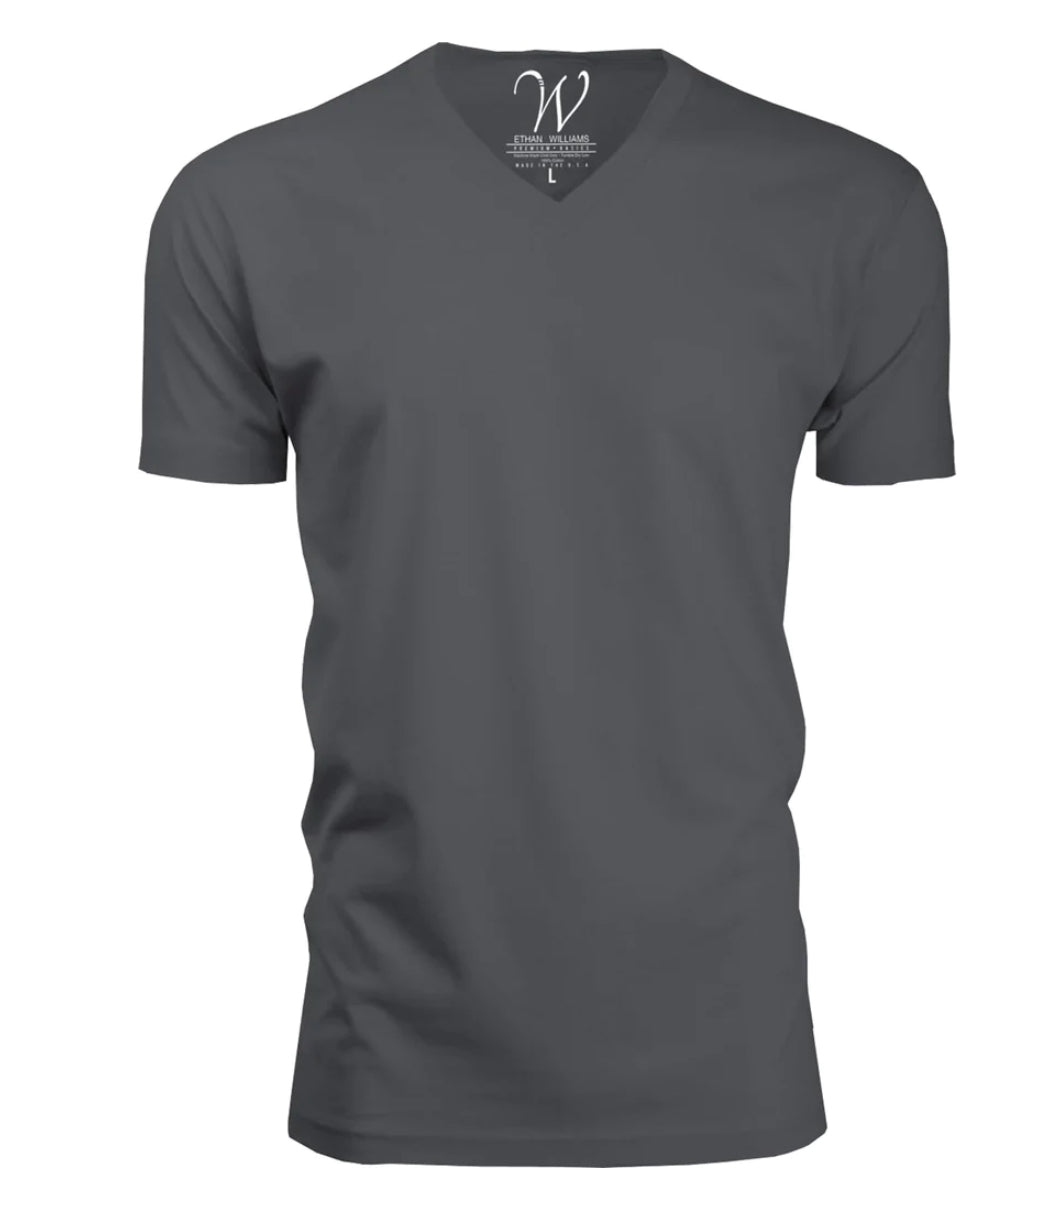 Heavy Metal Grey Ultra Soft Sueded V-Neck T-Shirt